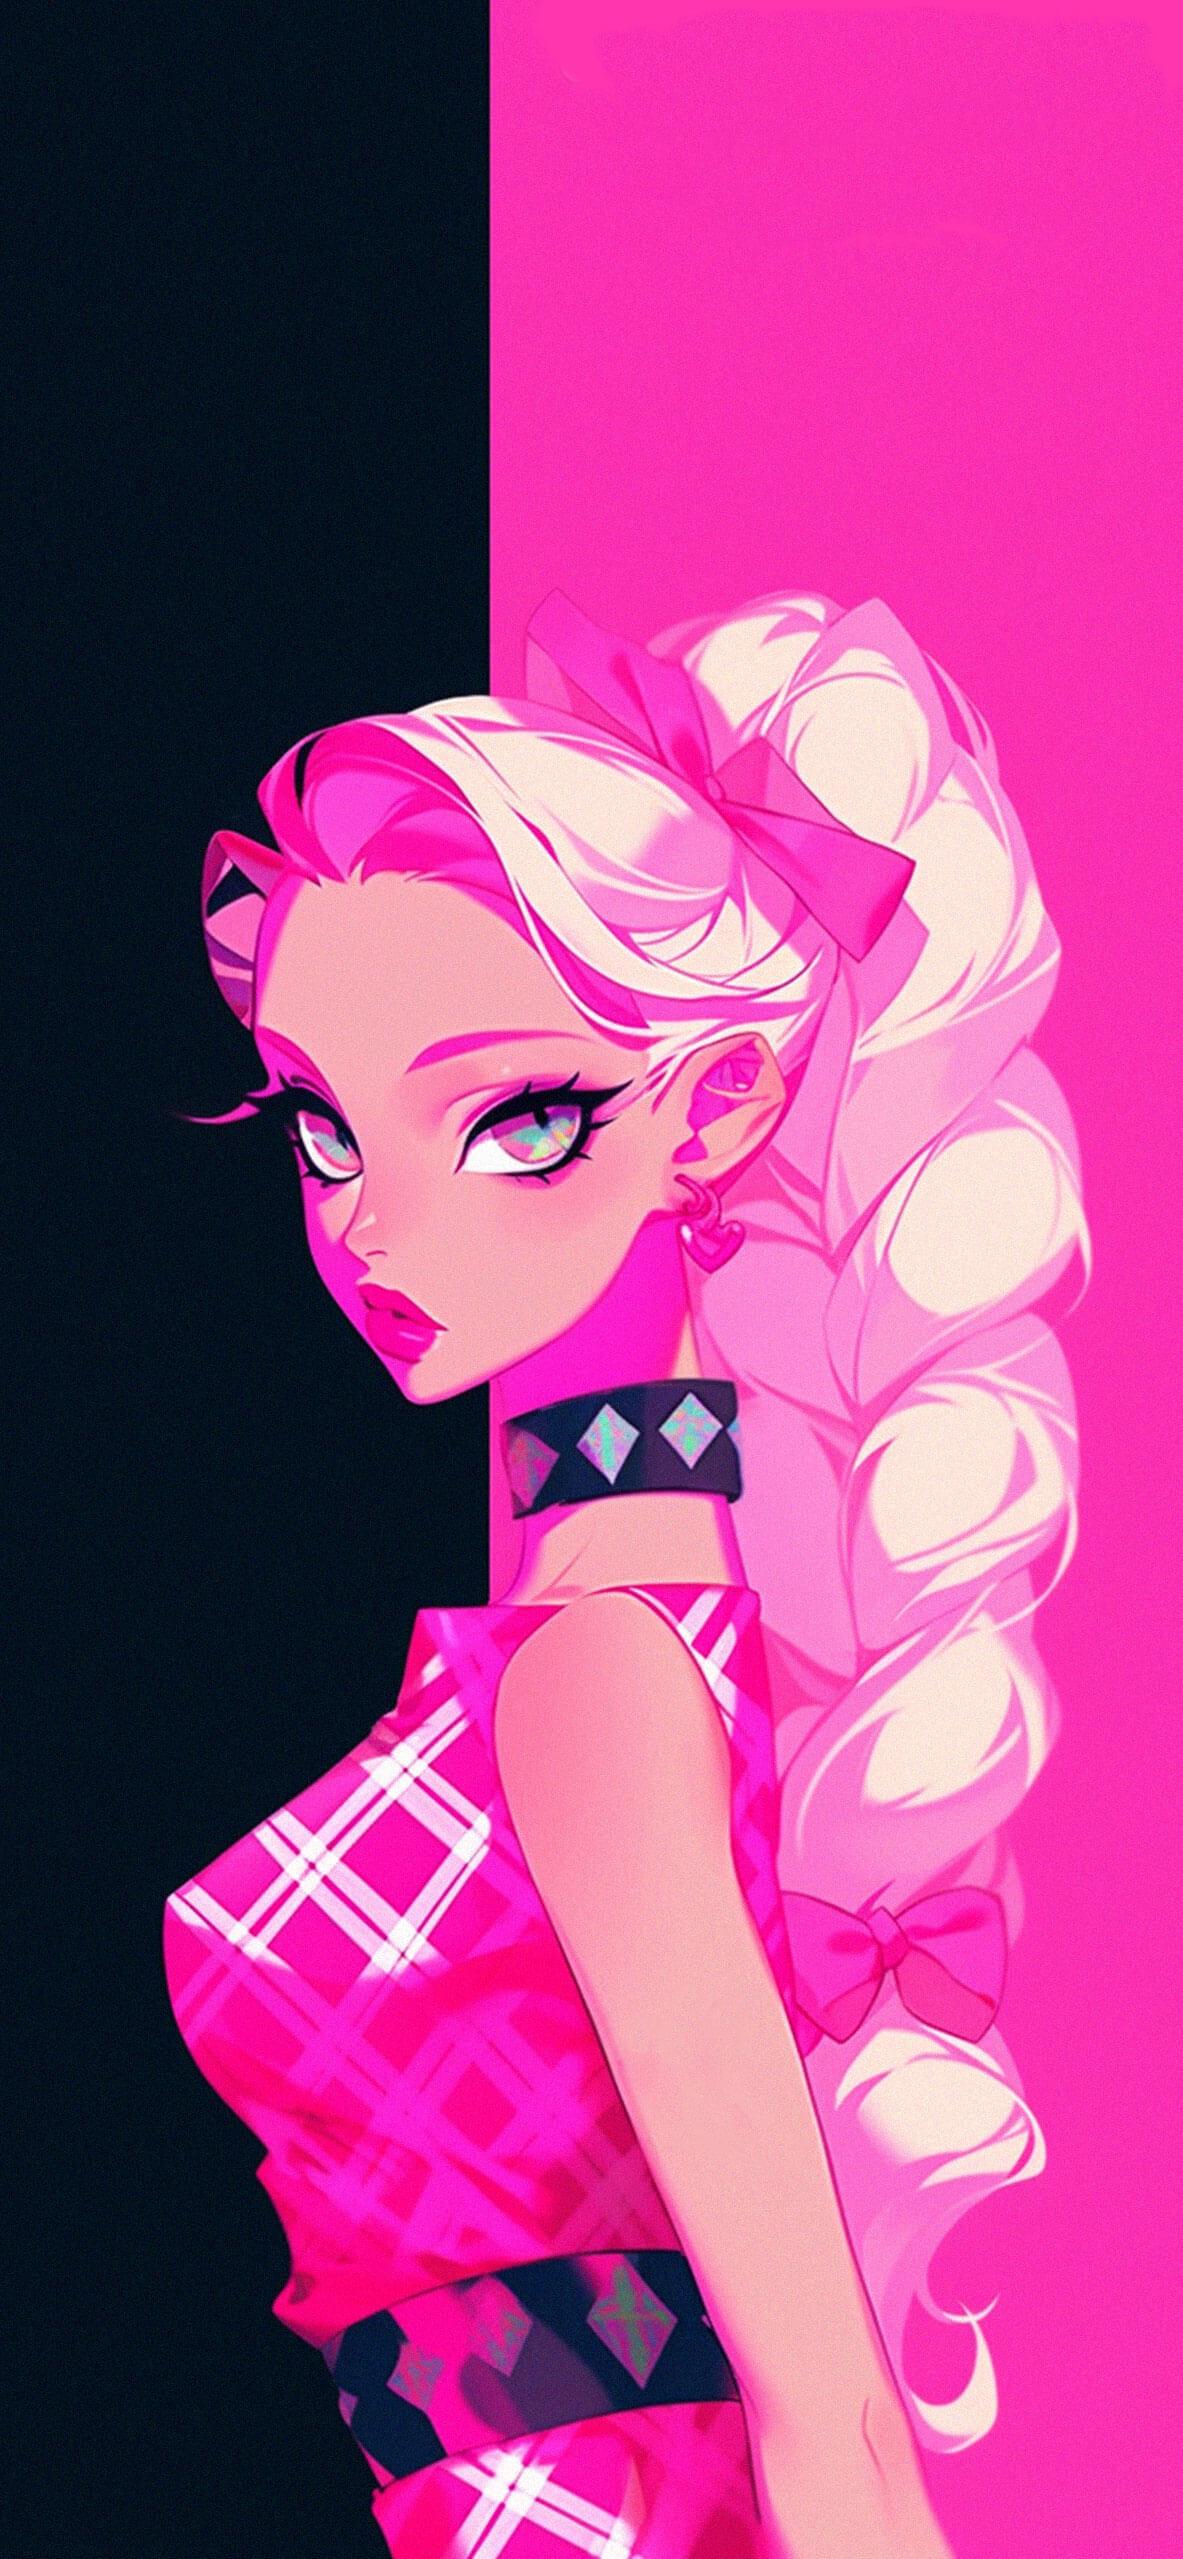 Free download Barbie Pink Aesthetic Wallpapers Best Pink Aesthetic ...